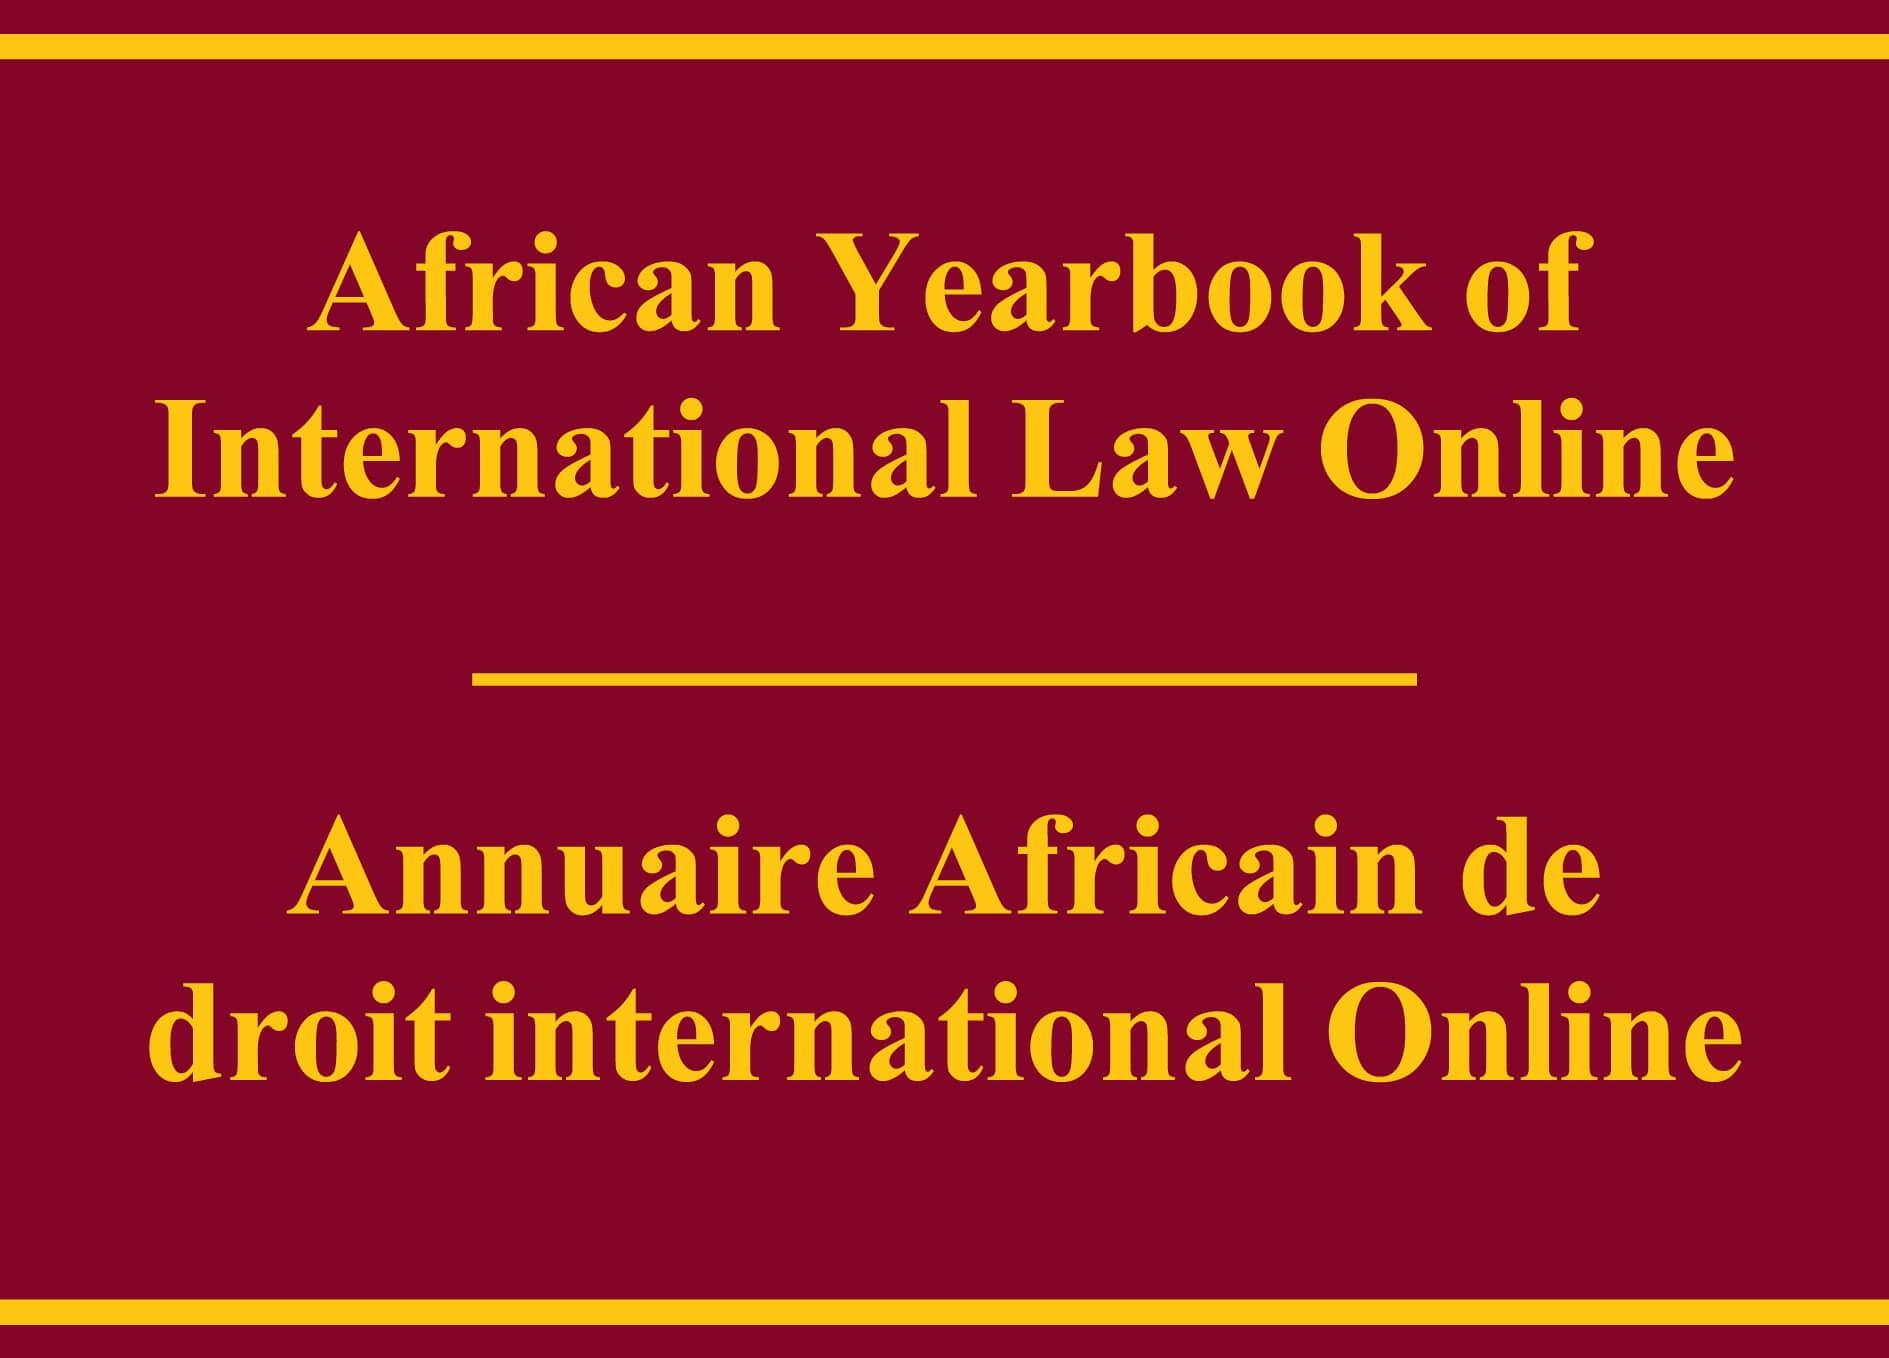 African Yearbook of International Law Online / Annuaire Africain de droit international Online - Volume 22 (2017): Issue 1 (Jul 2017)